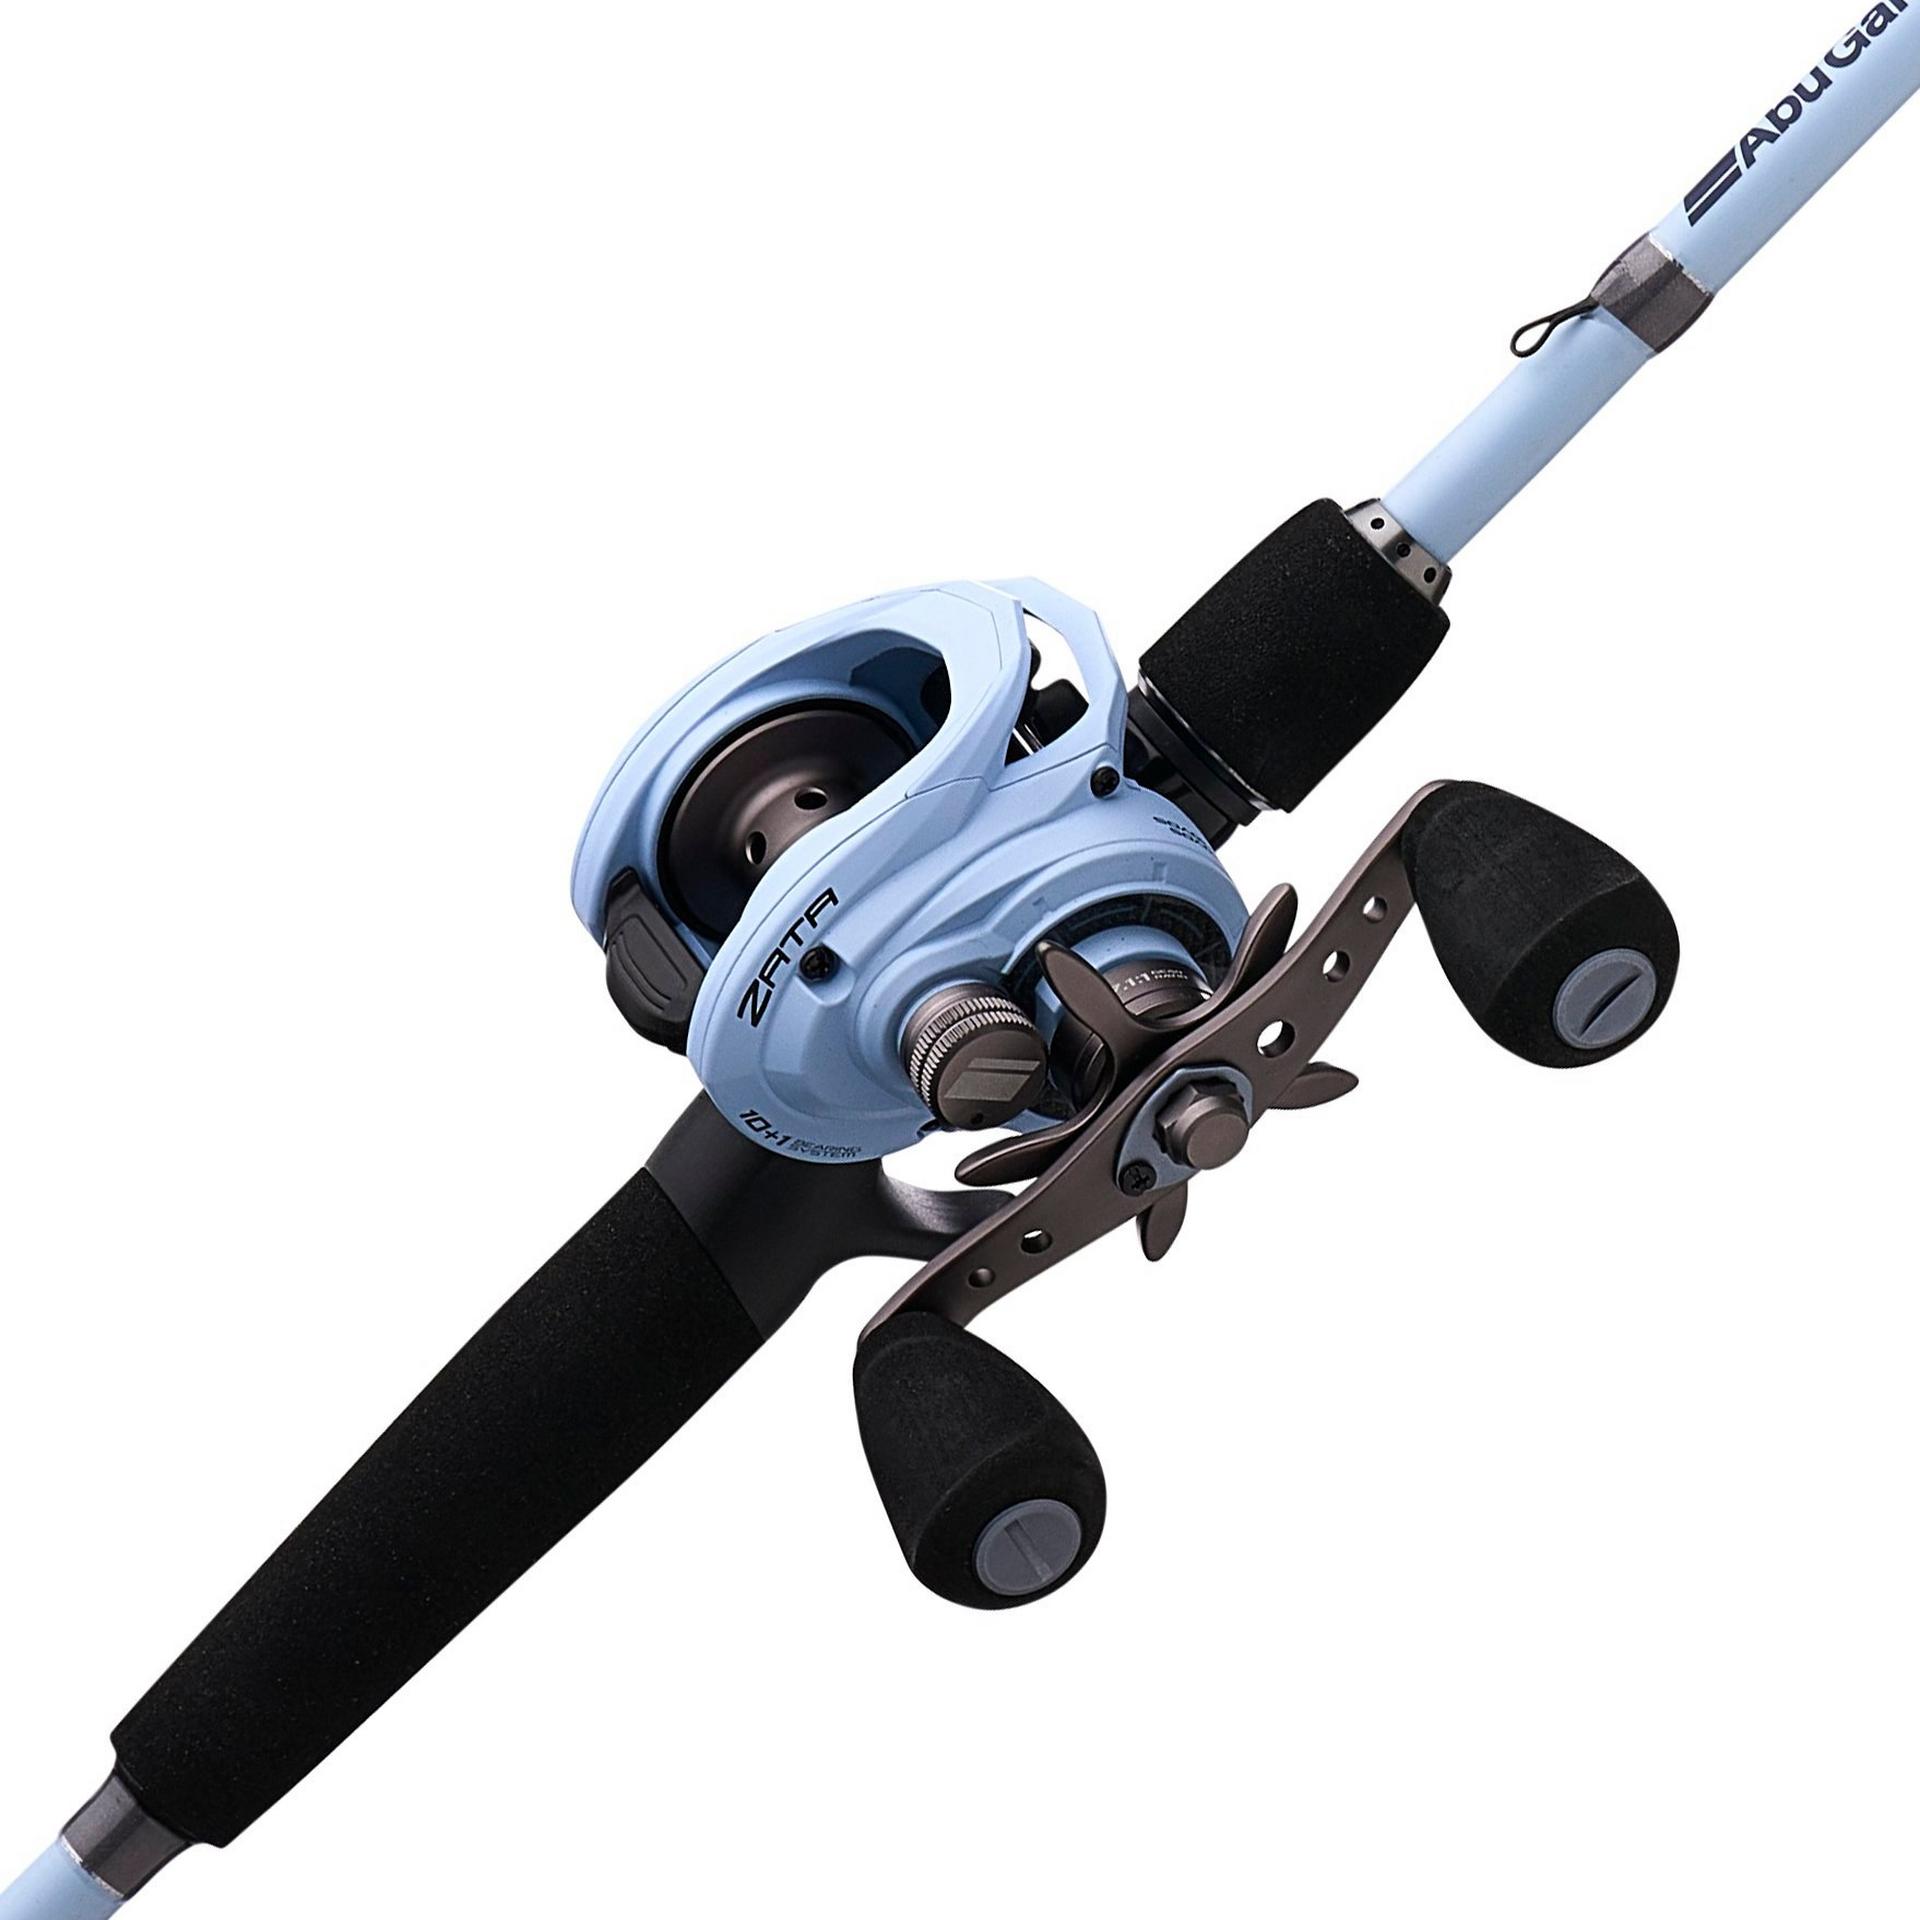 2.1m2.7m Rod Reel Combos Telescopic Spinning Fishing Rod Spinning Reels Set  Carbon 29cm Cork Handle Pikes Fish Trout Rods Pesca ZYHYD